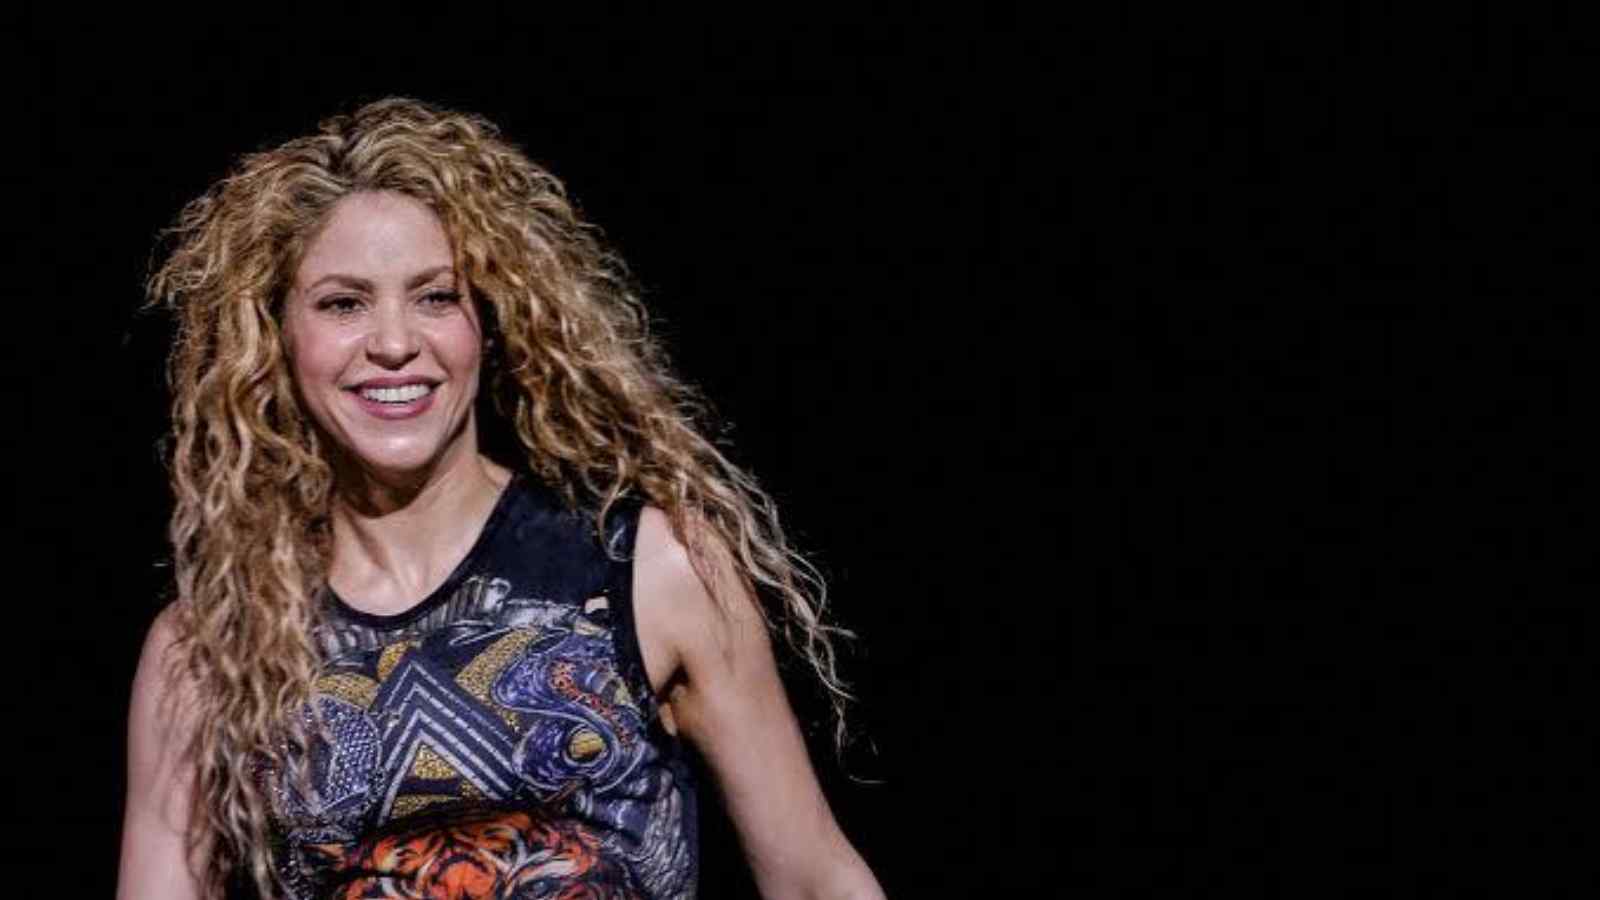 Shakira tangled in a tax fraud case, may face eight years in prison